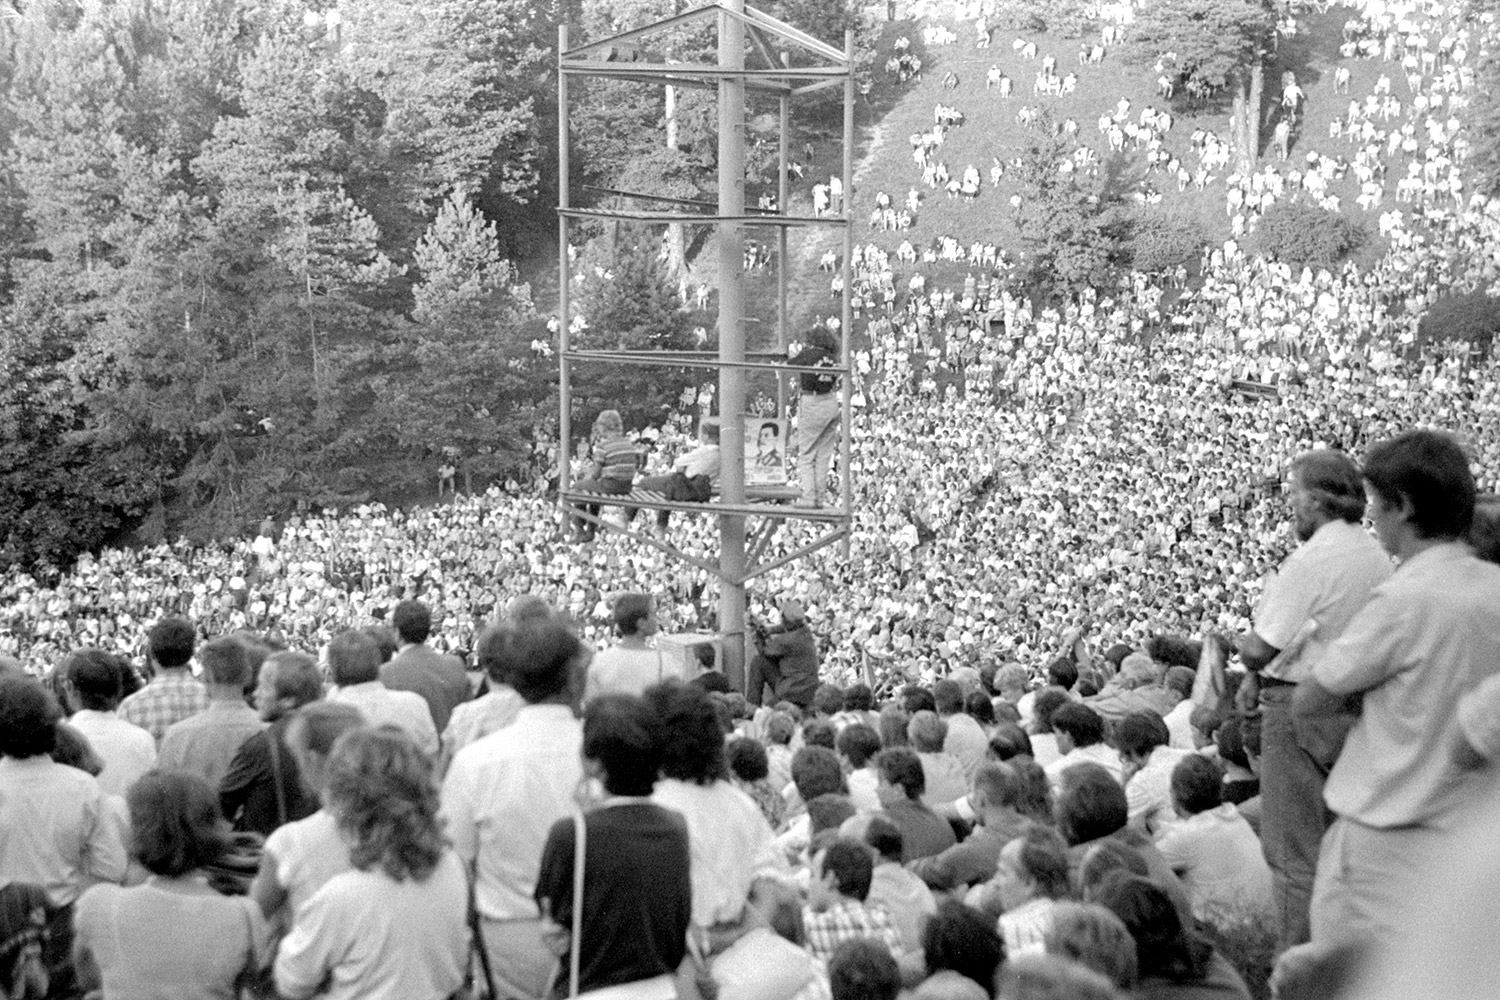 22/08/1989 – Rally in Kalnų Park against the consequences of the Molotov-Ribbentrop Pact. LVCA, photographer: R. Žičkus.